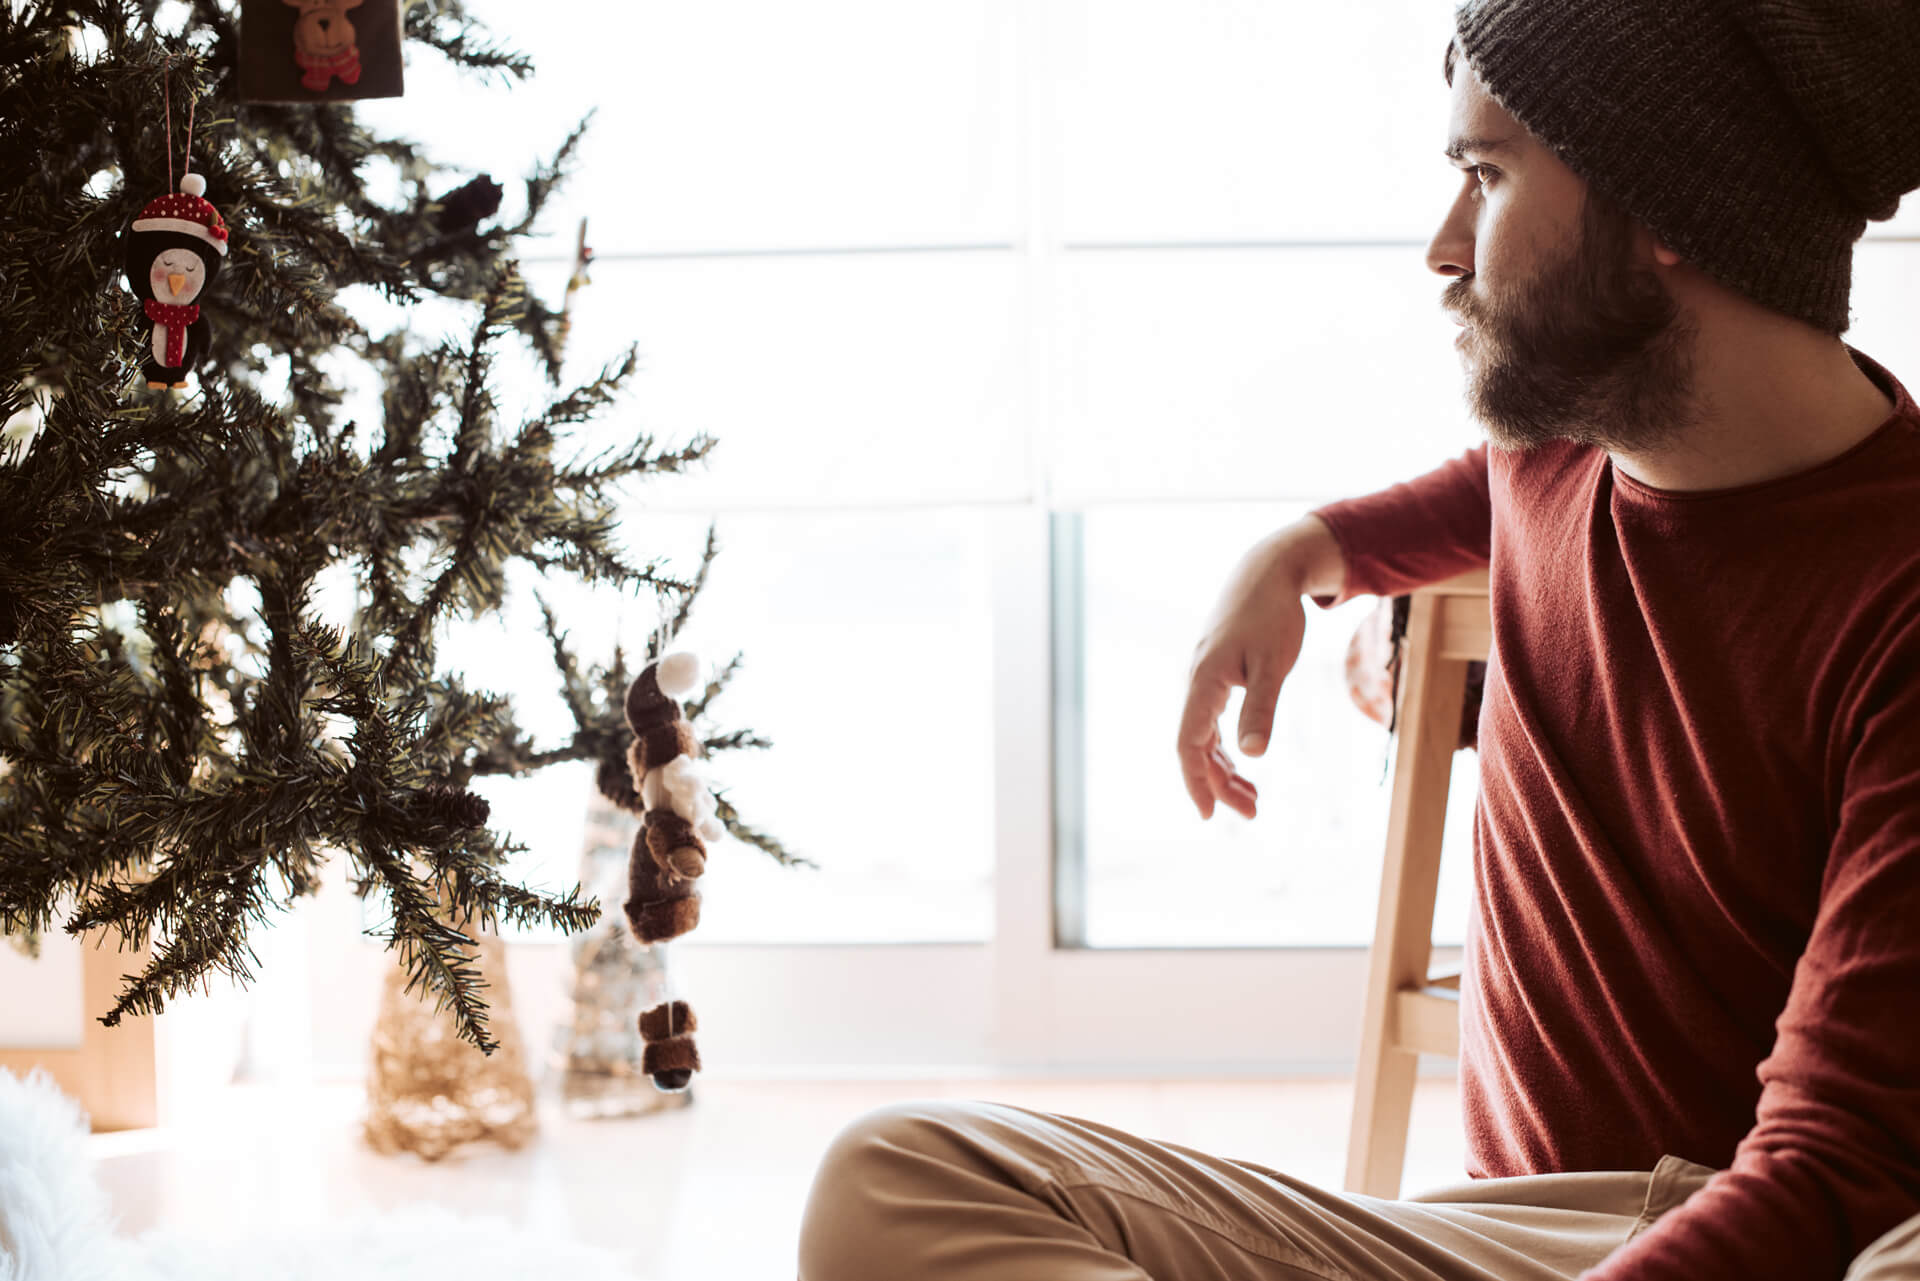 The Dangerous Link Between Substance Abuse and the Holidays